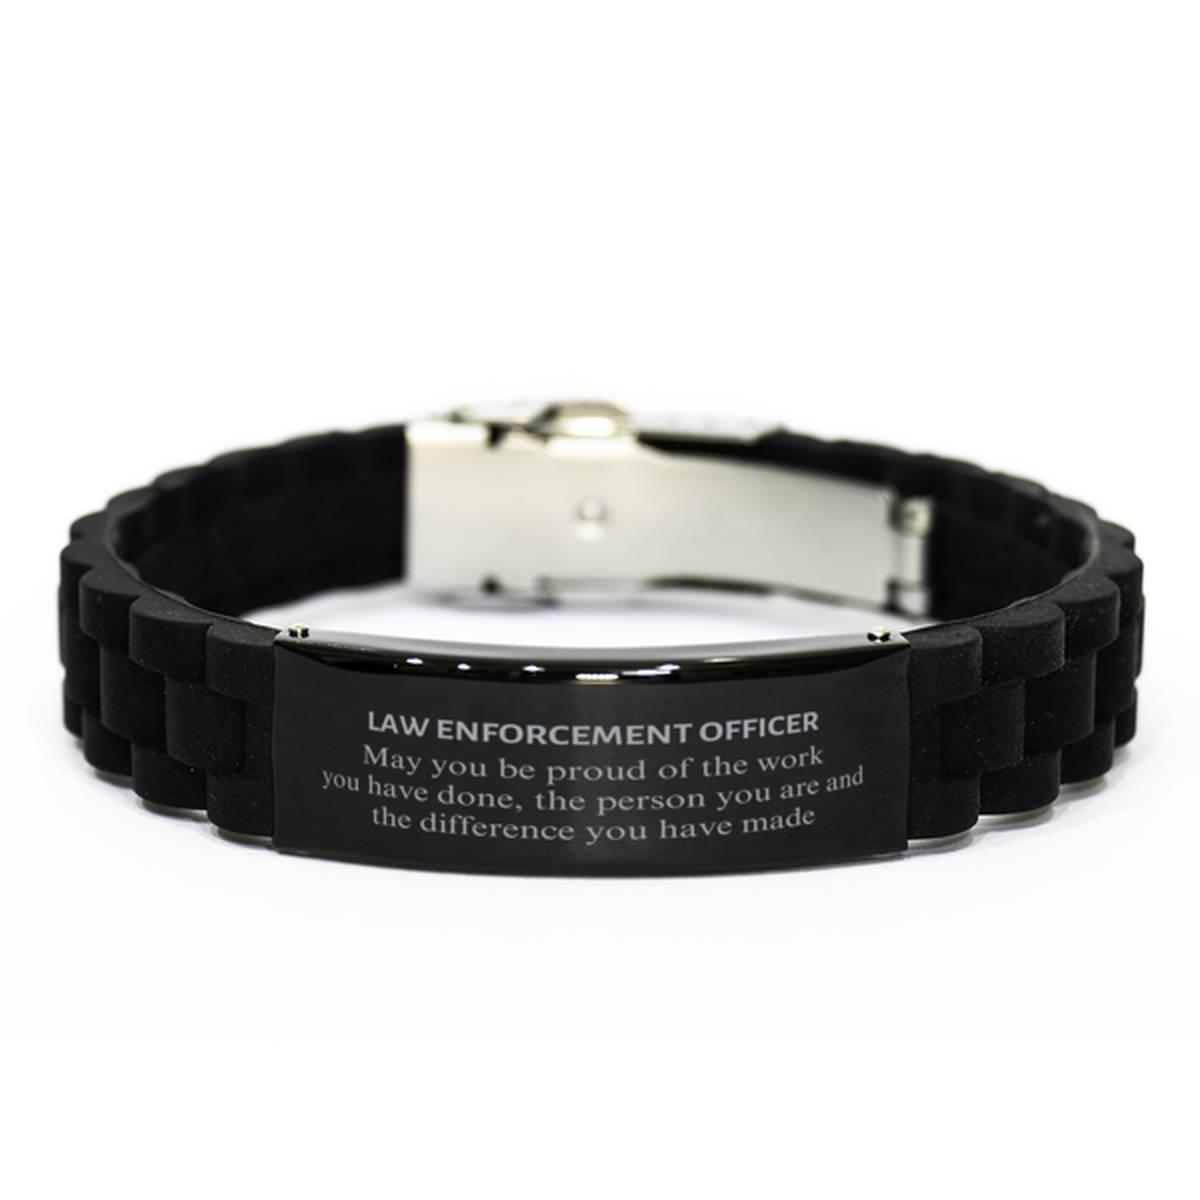 Law Enforcement Officer May you be proud of the work you have done, Retirement Law Enforcement Officer Black Glidelock Clasp Bracelet for Colleague Appreciation Gifts Amazing for Law Enforcement Officer